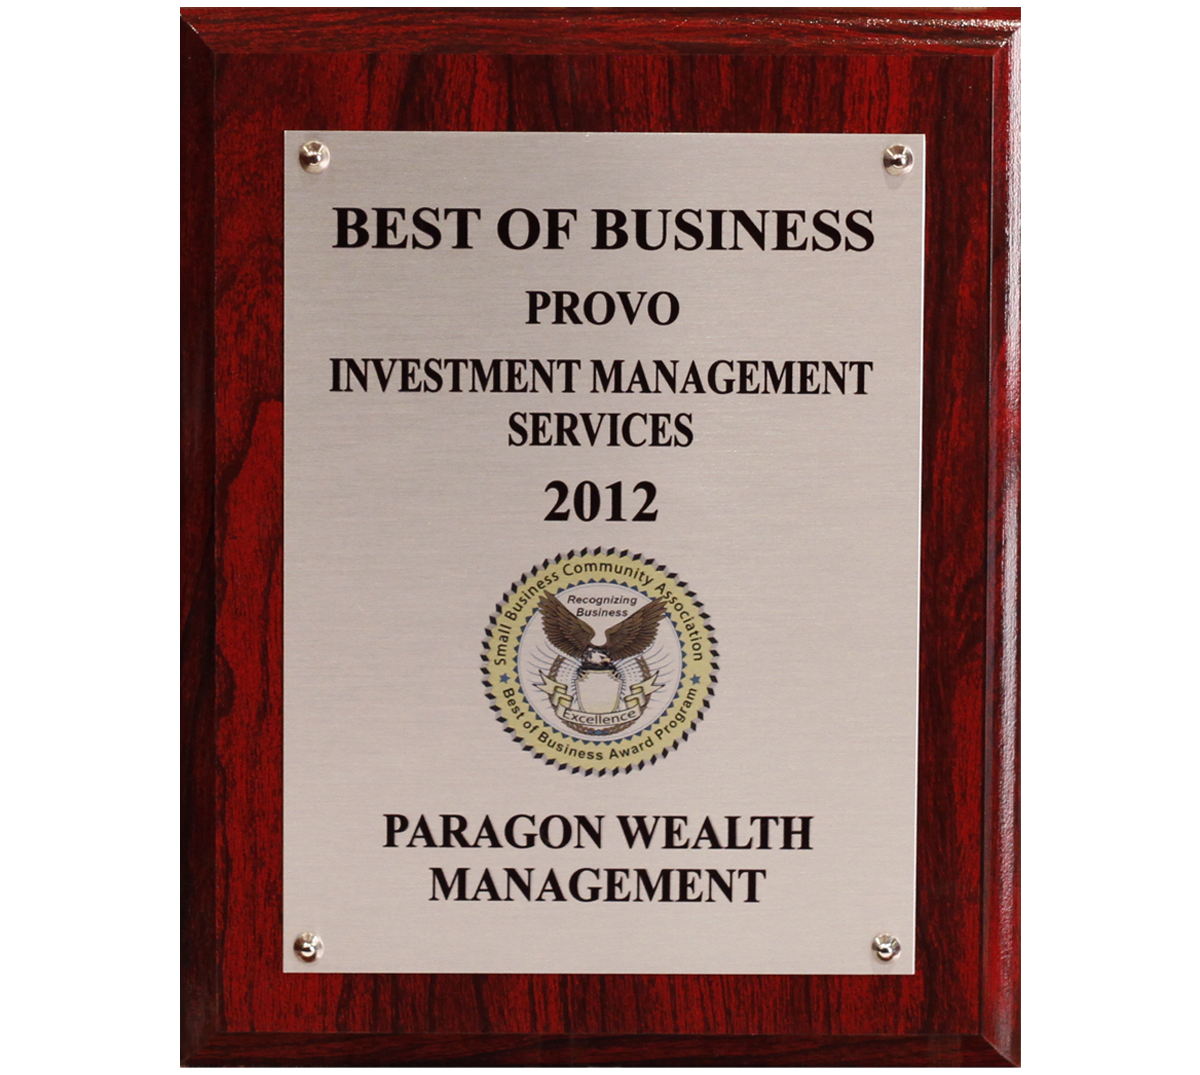 Paragon Wealth Management 2012 Best Of Business Award Provo